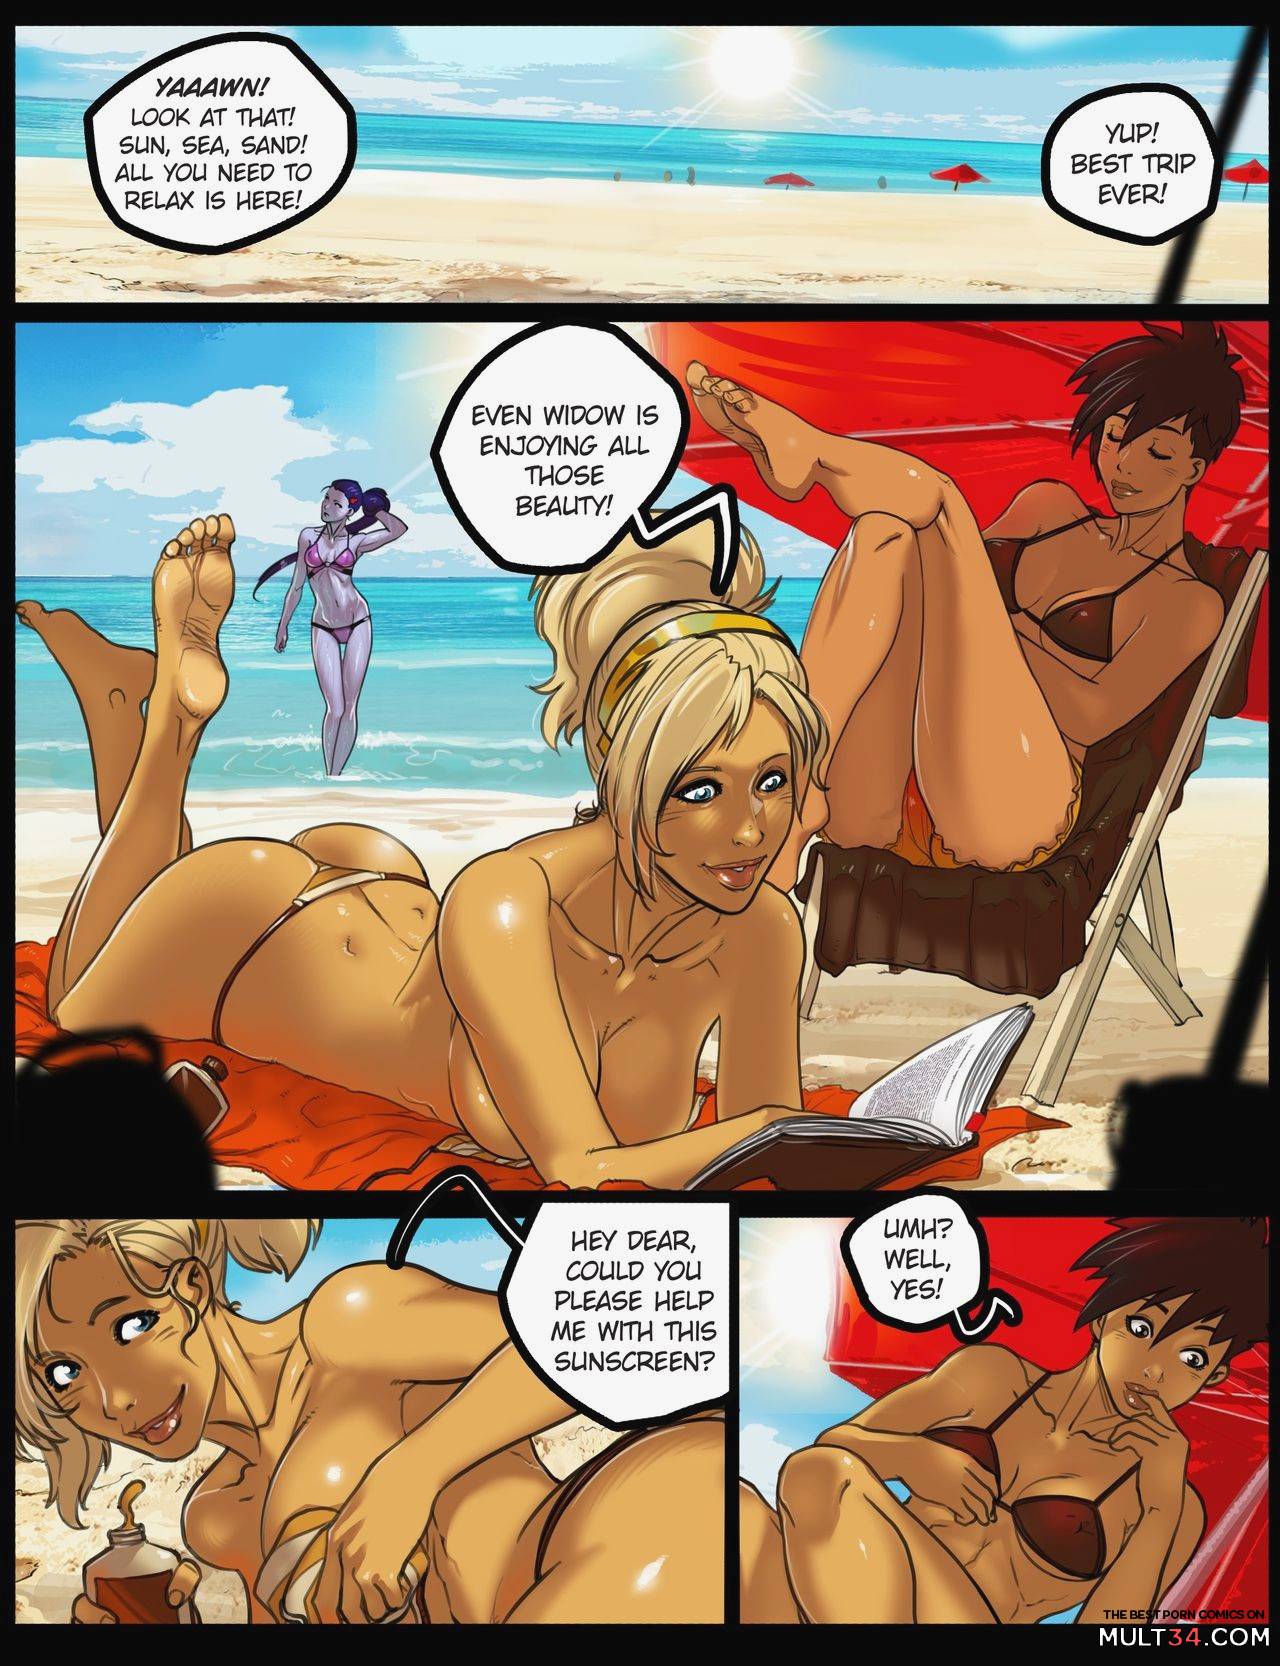 Overbeach Party page 2